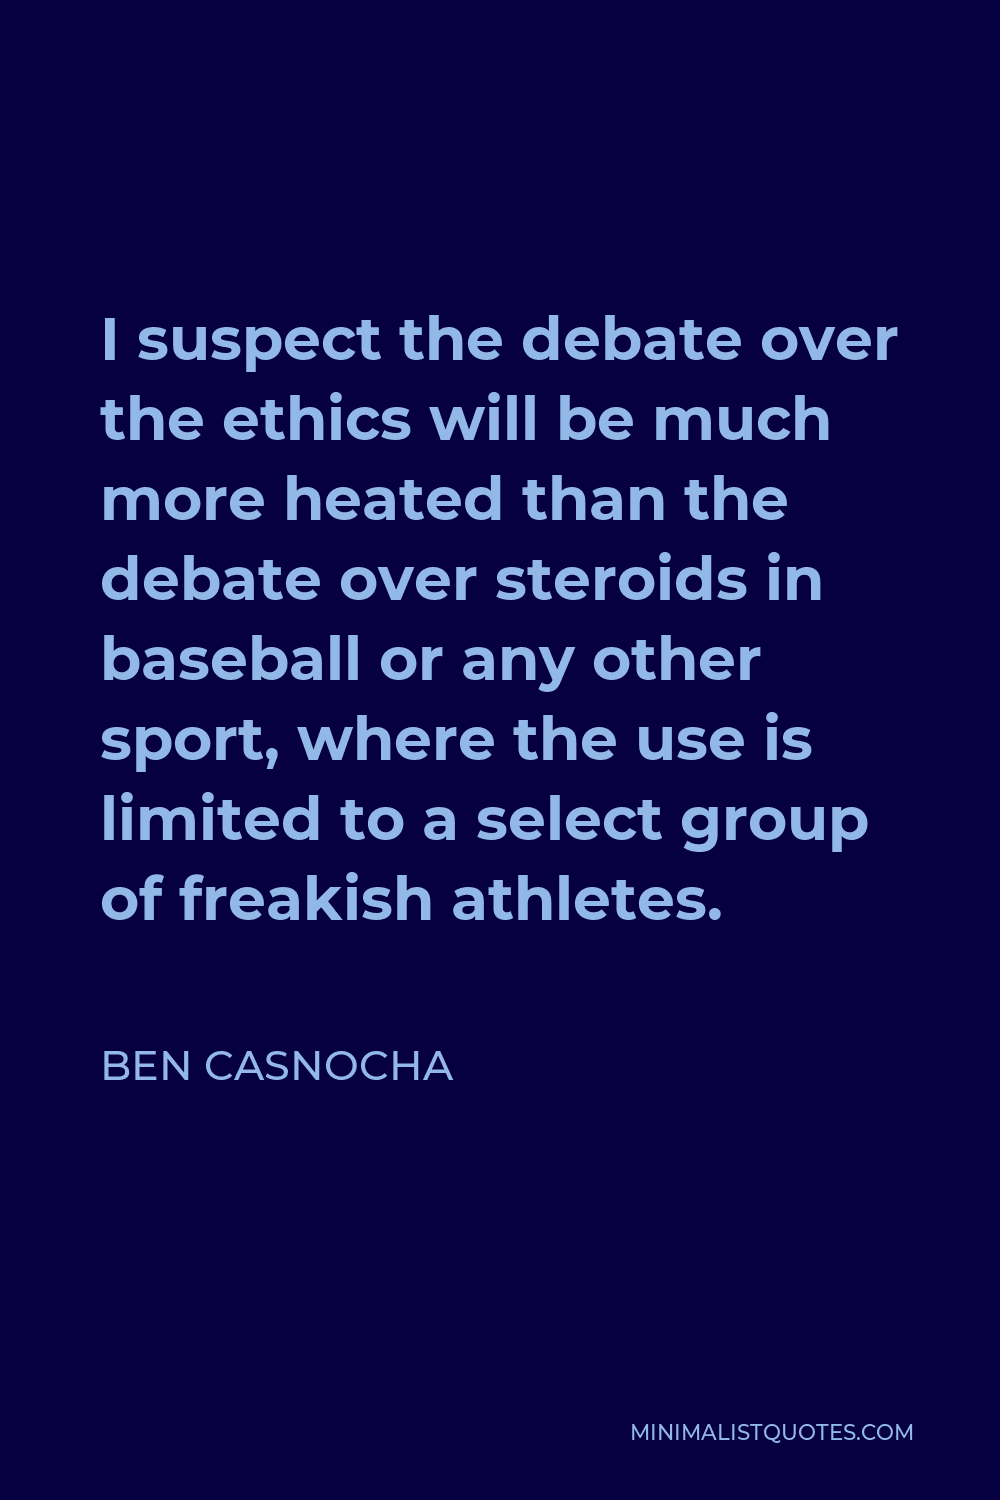 Ben Casnocha Quote - I suspect the debate over the ethics will be much more heated than the debate over steroids in baseball or any other sport, where the use is limited to a select group of freakish athletes.